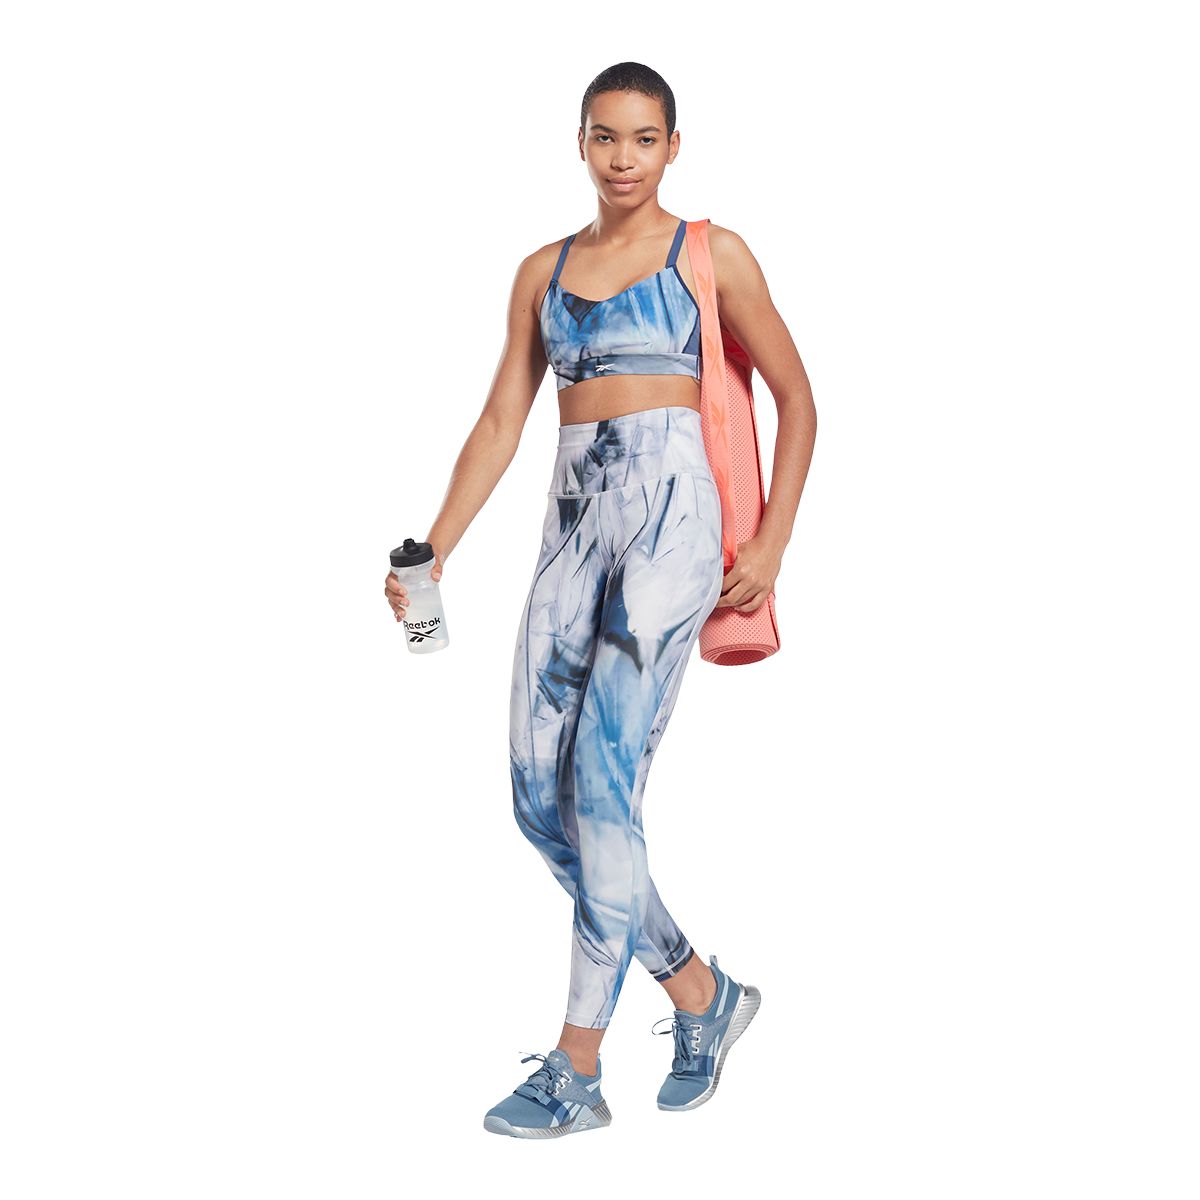 Reebok Women's Studio Lux All Over Print High Rise Tights